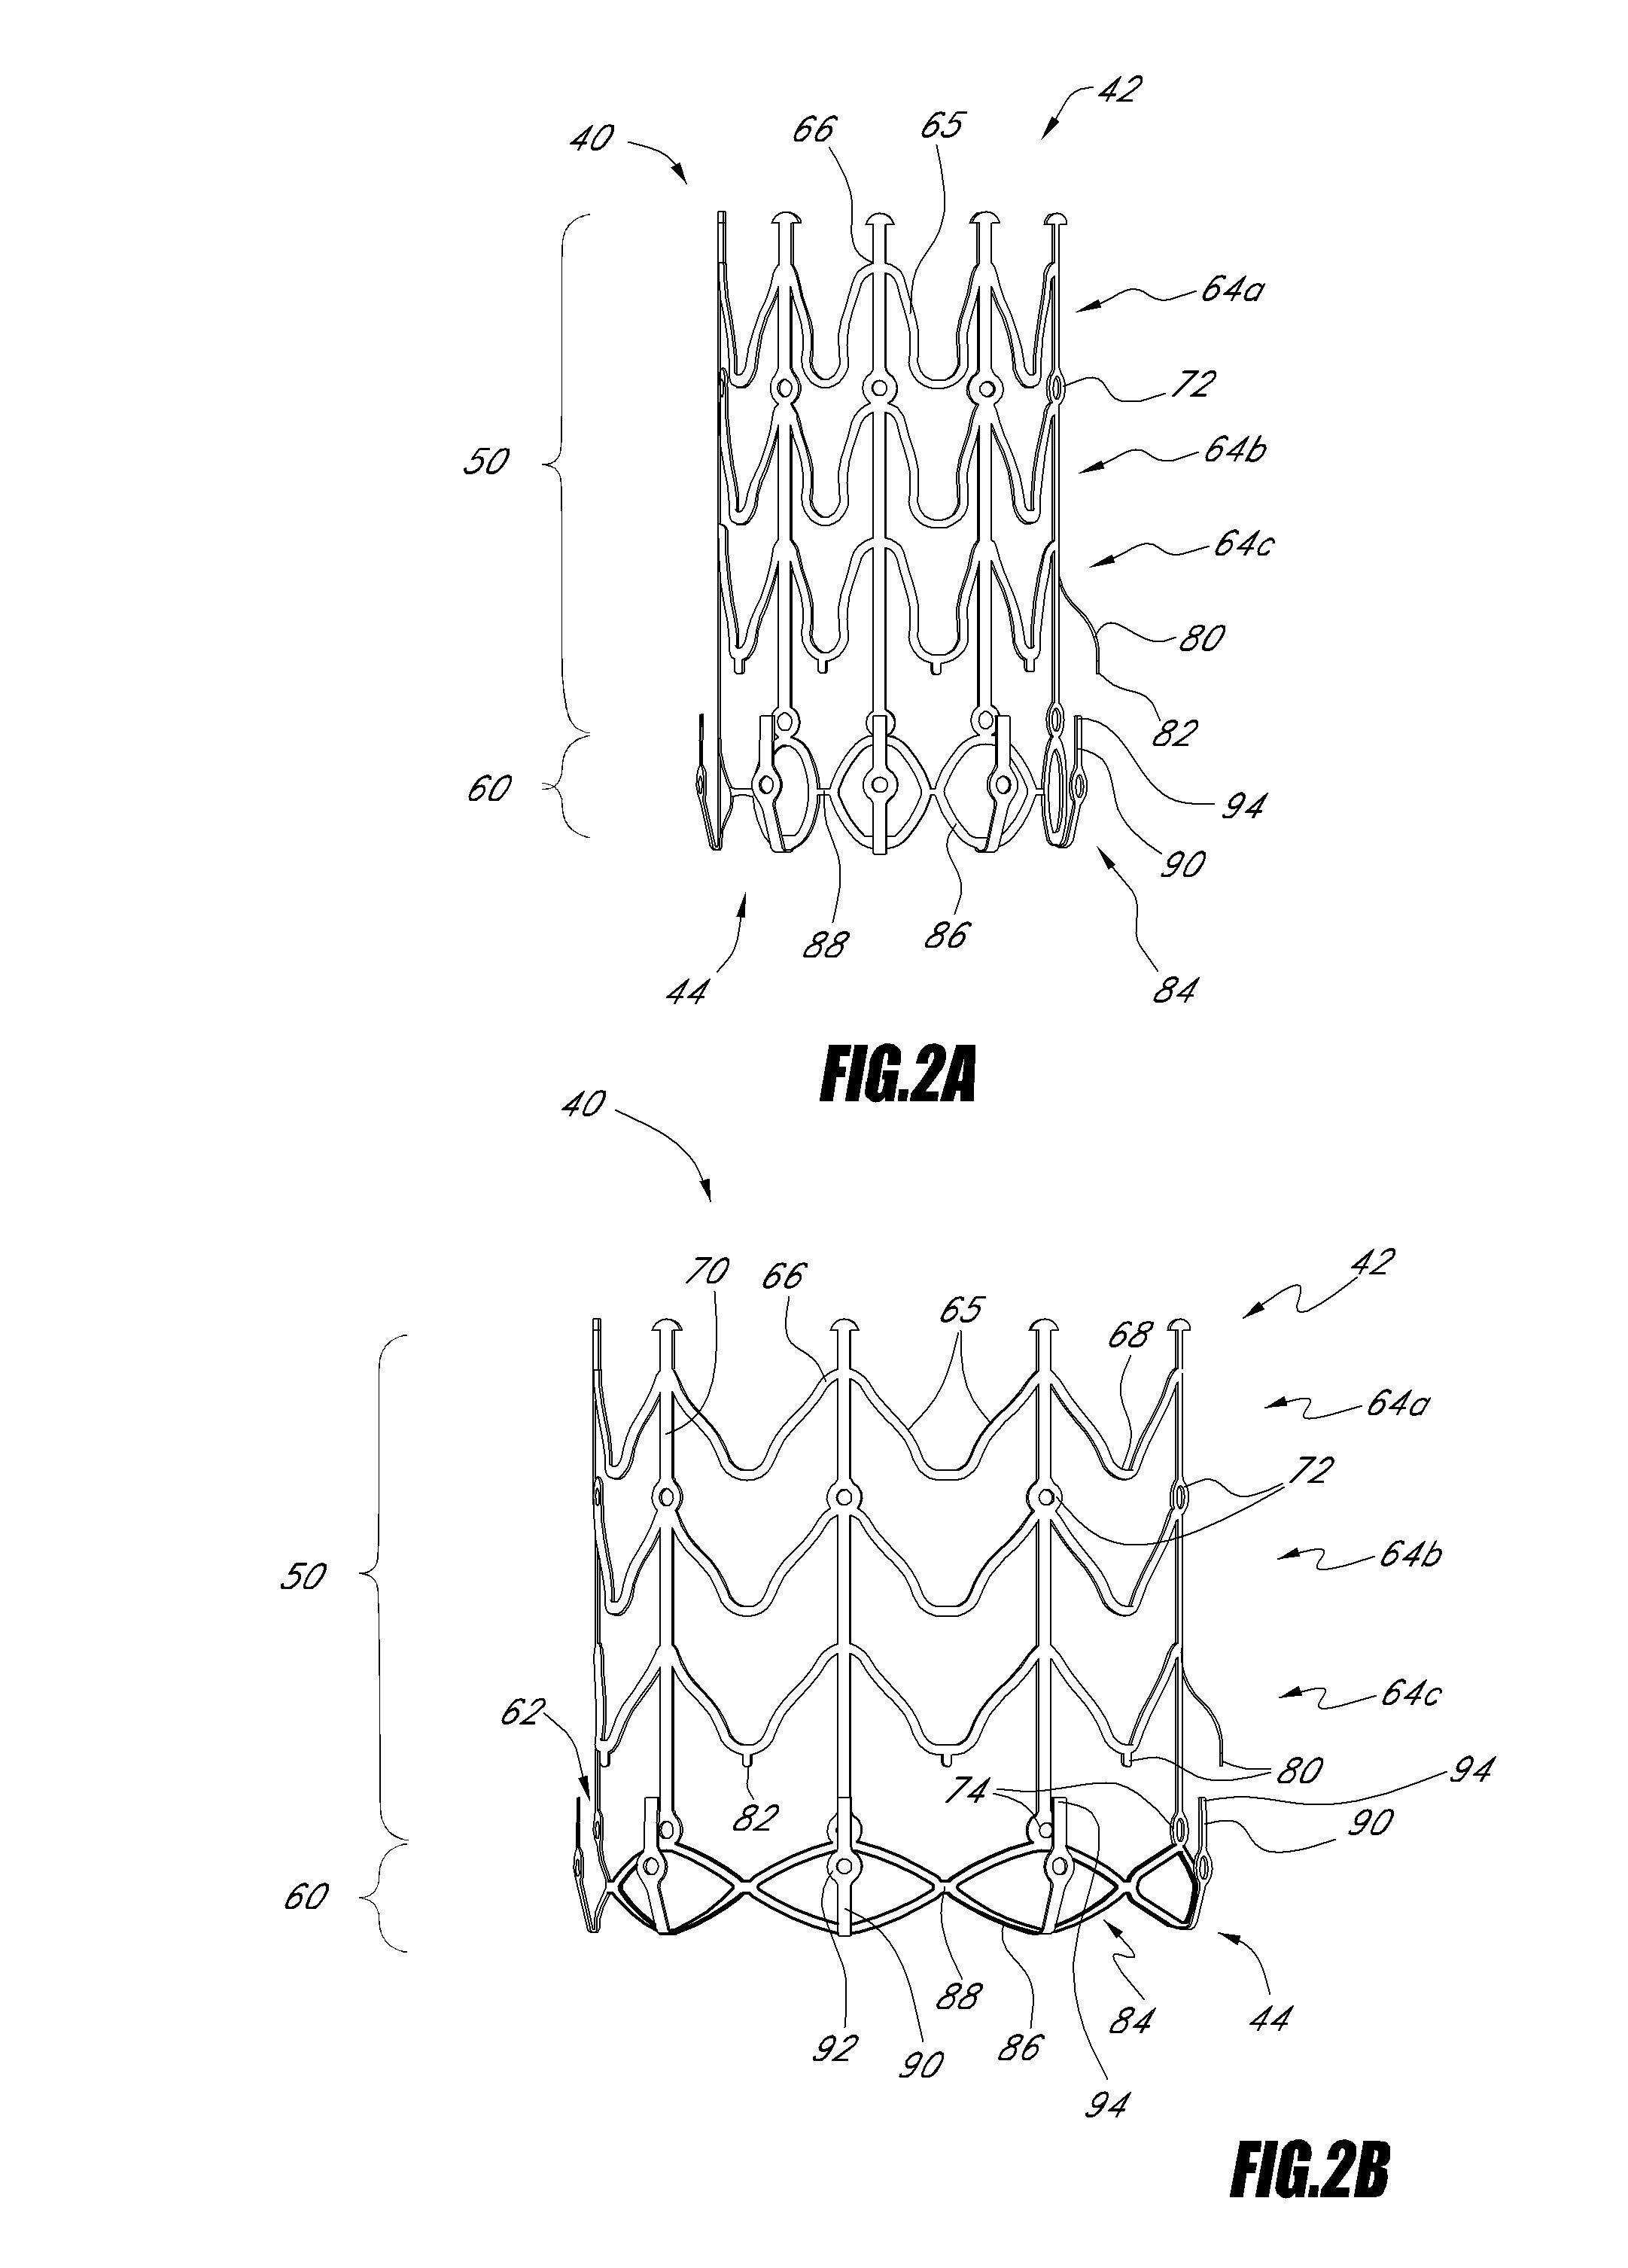 Vascular implant and delivery system